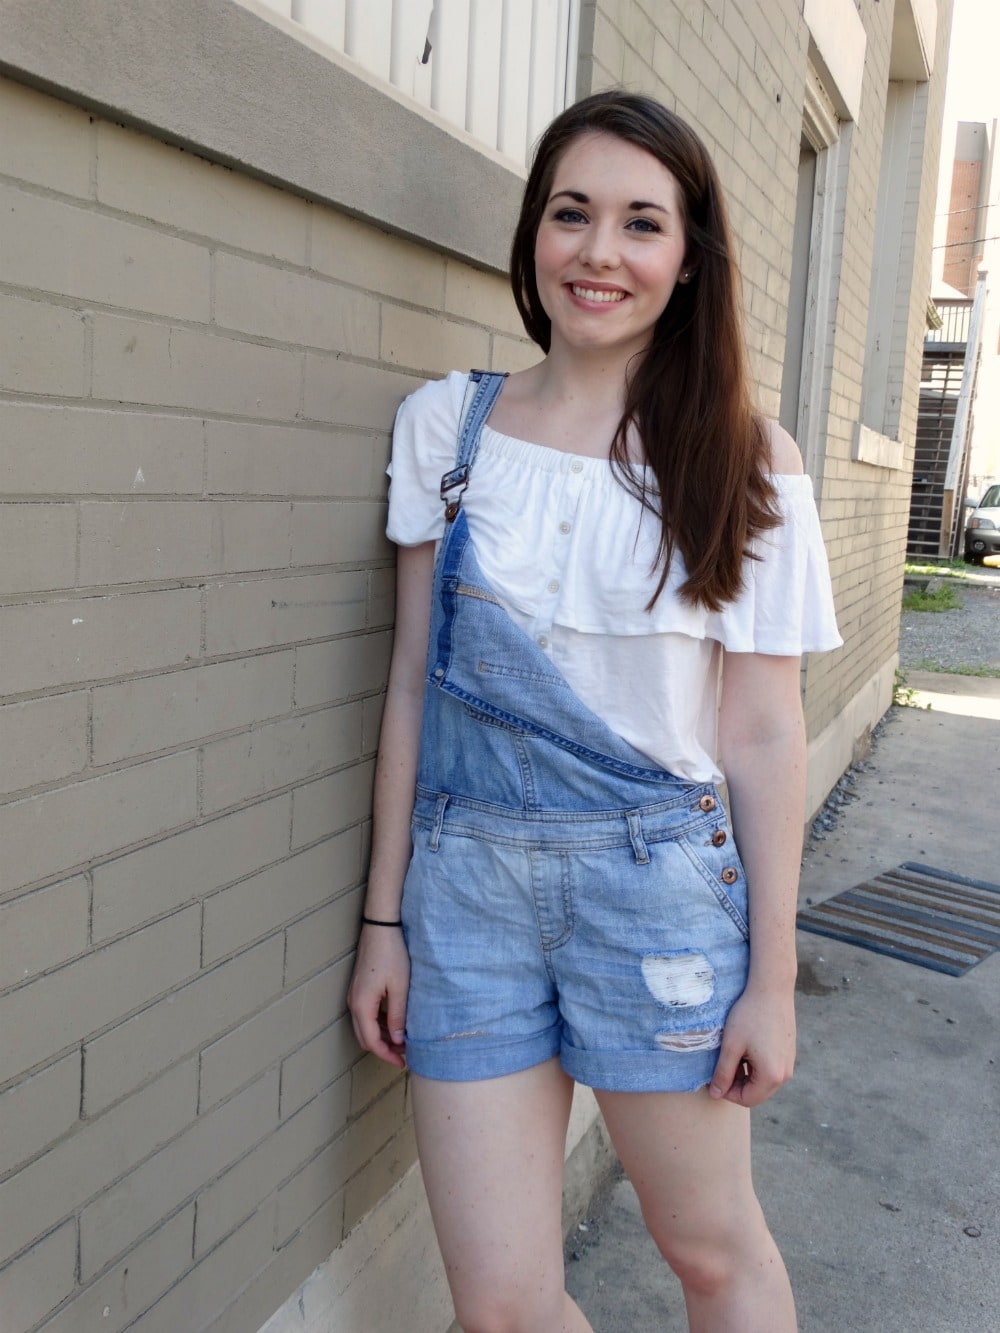 Street style: student at West Virginia University wears a white off-the-shoulder top with overall shorts